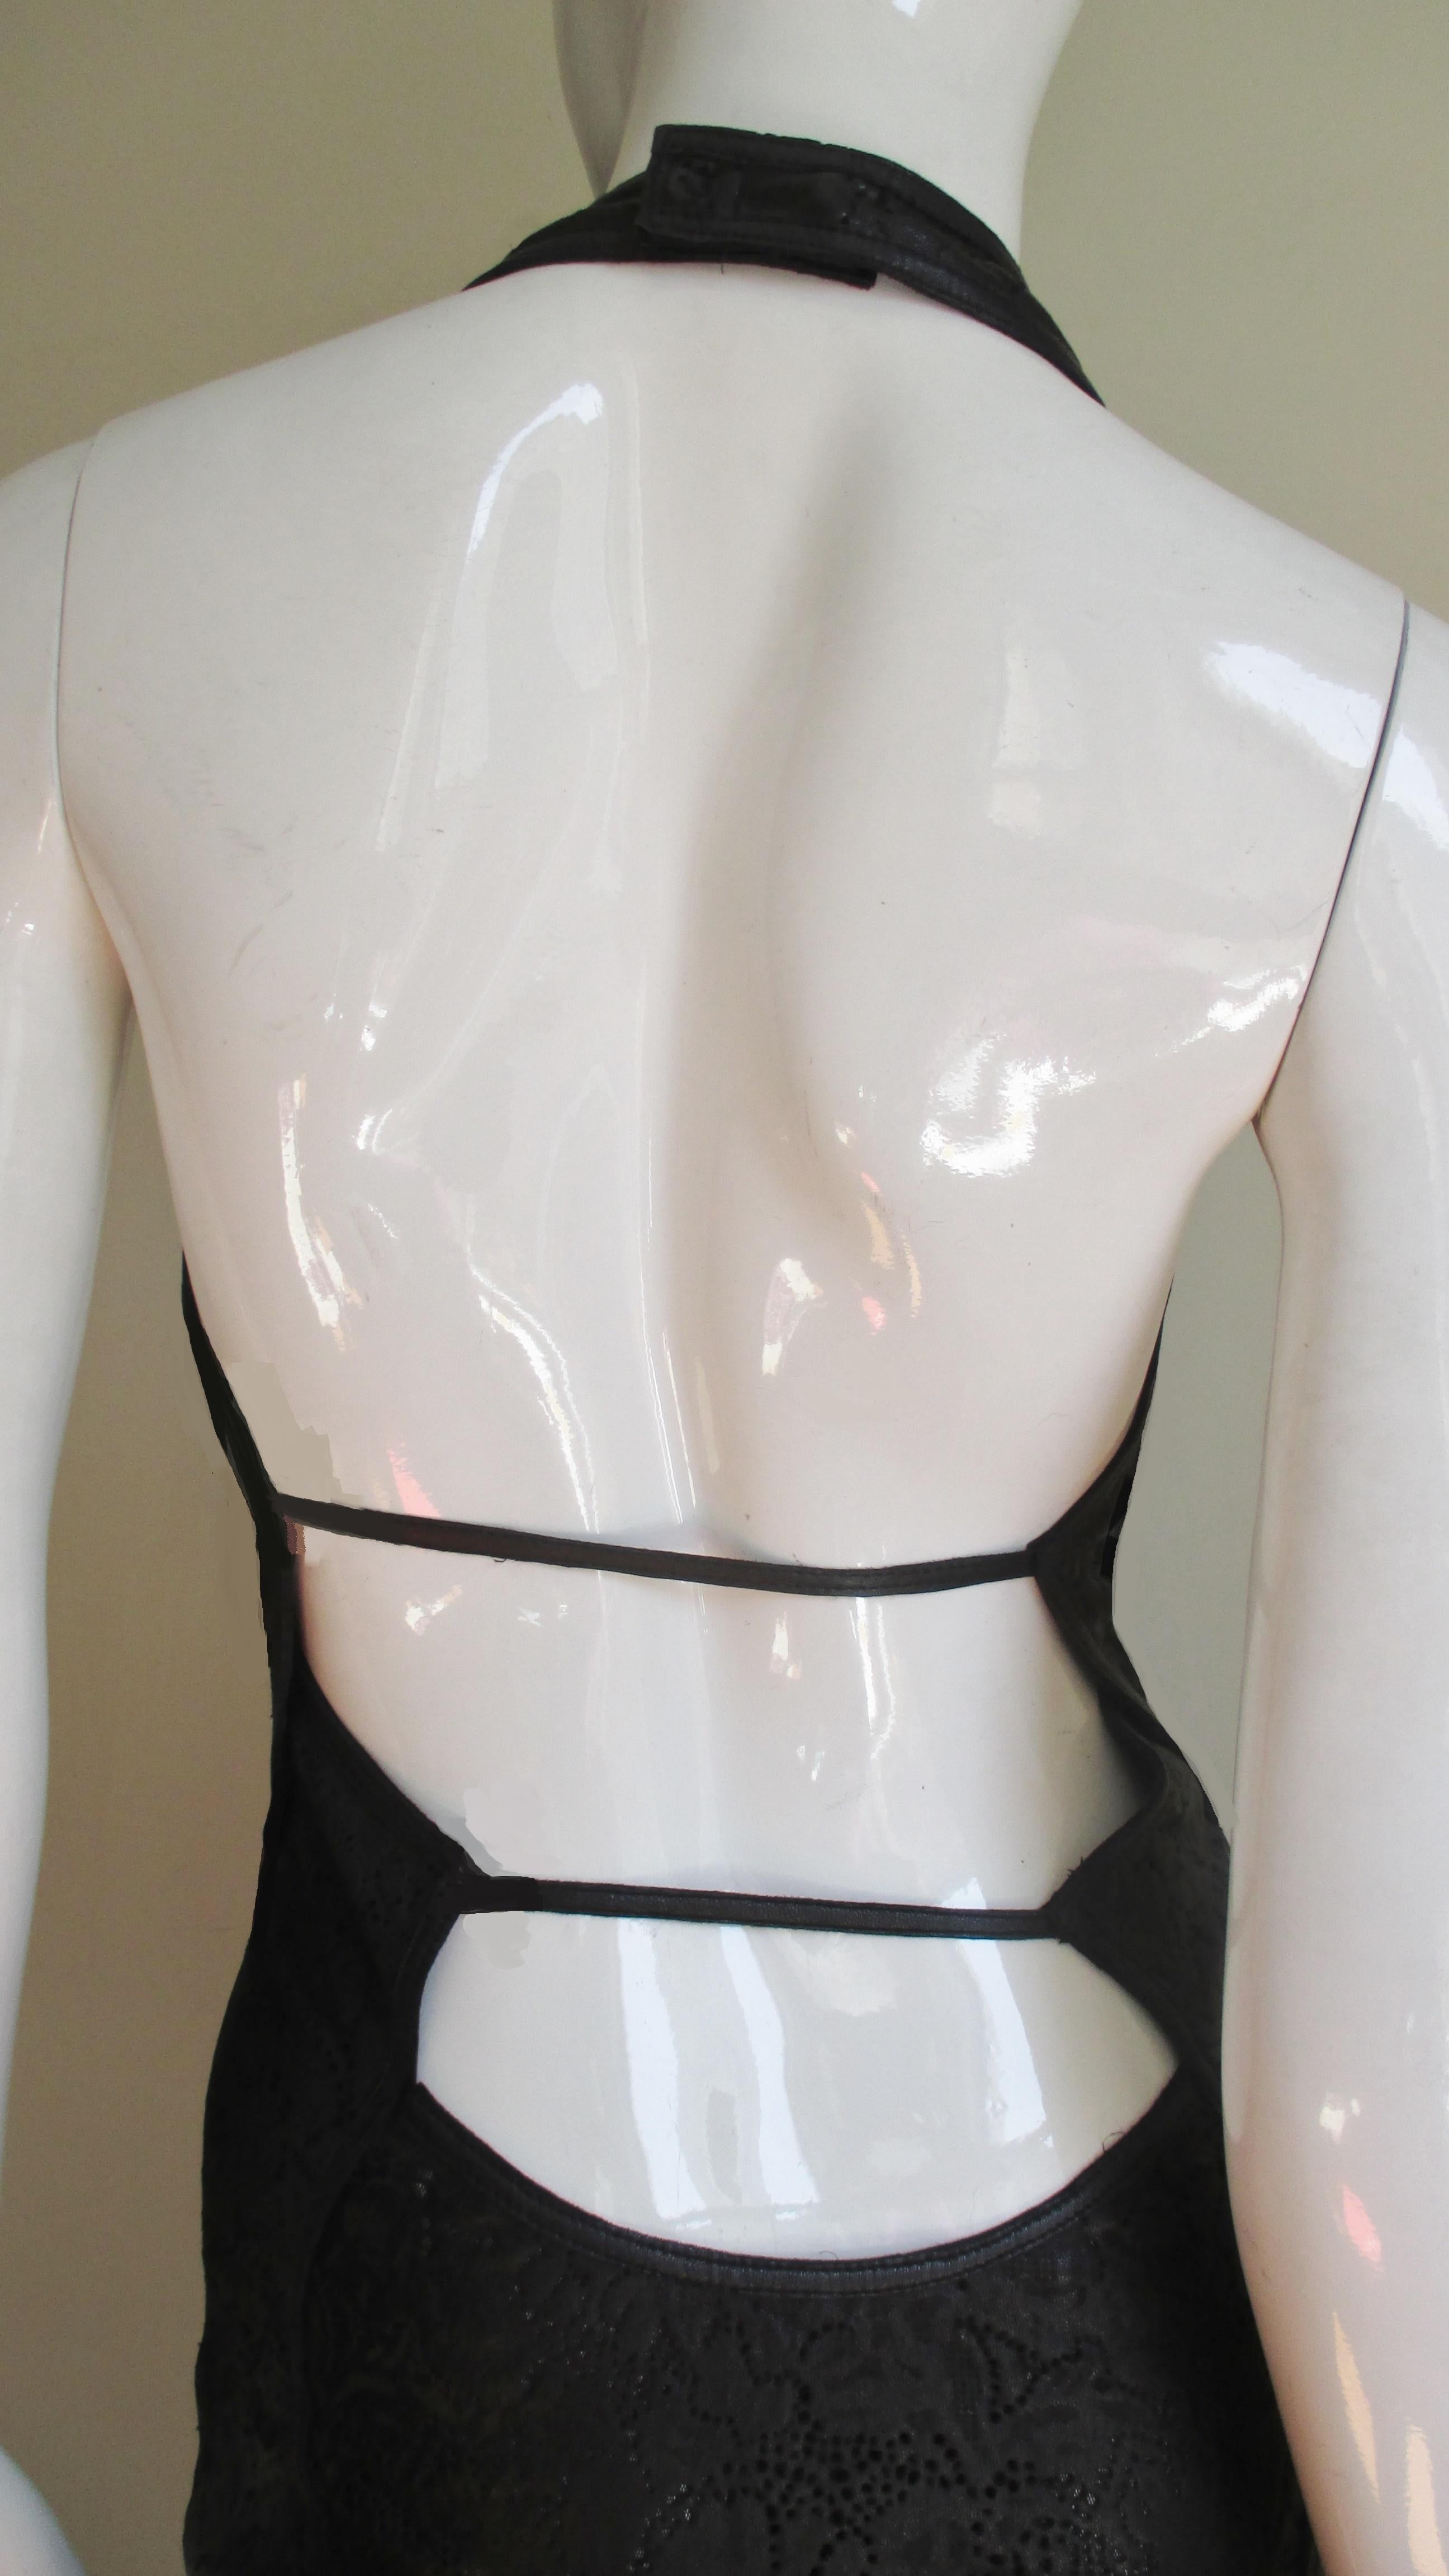 Gianni Versace Laser Perforated Leather Halter Dress 1990s For Sale 1